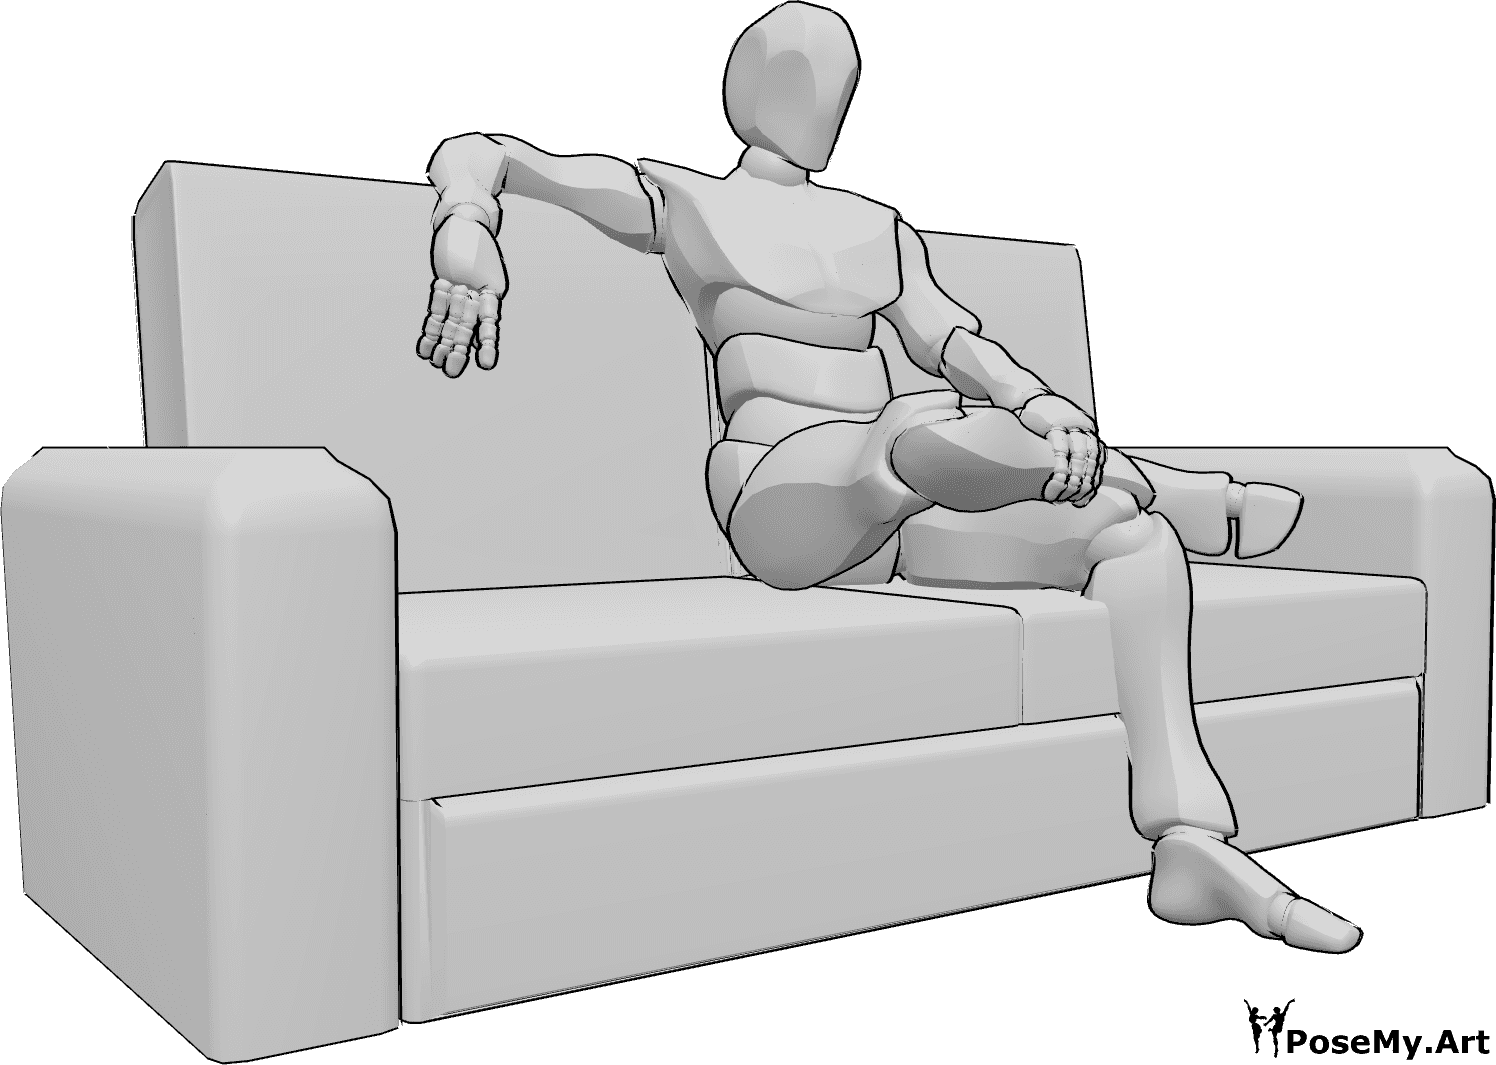 Pose Reference- Crossed legs sitting pose - Male is sitting on the couch with his legs crossed, holding his leg with left hand and resting his right hand on top of the sofa